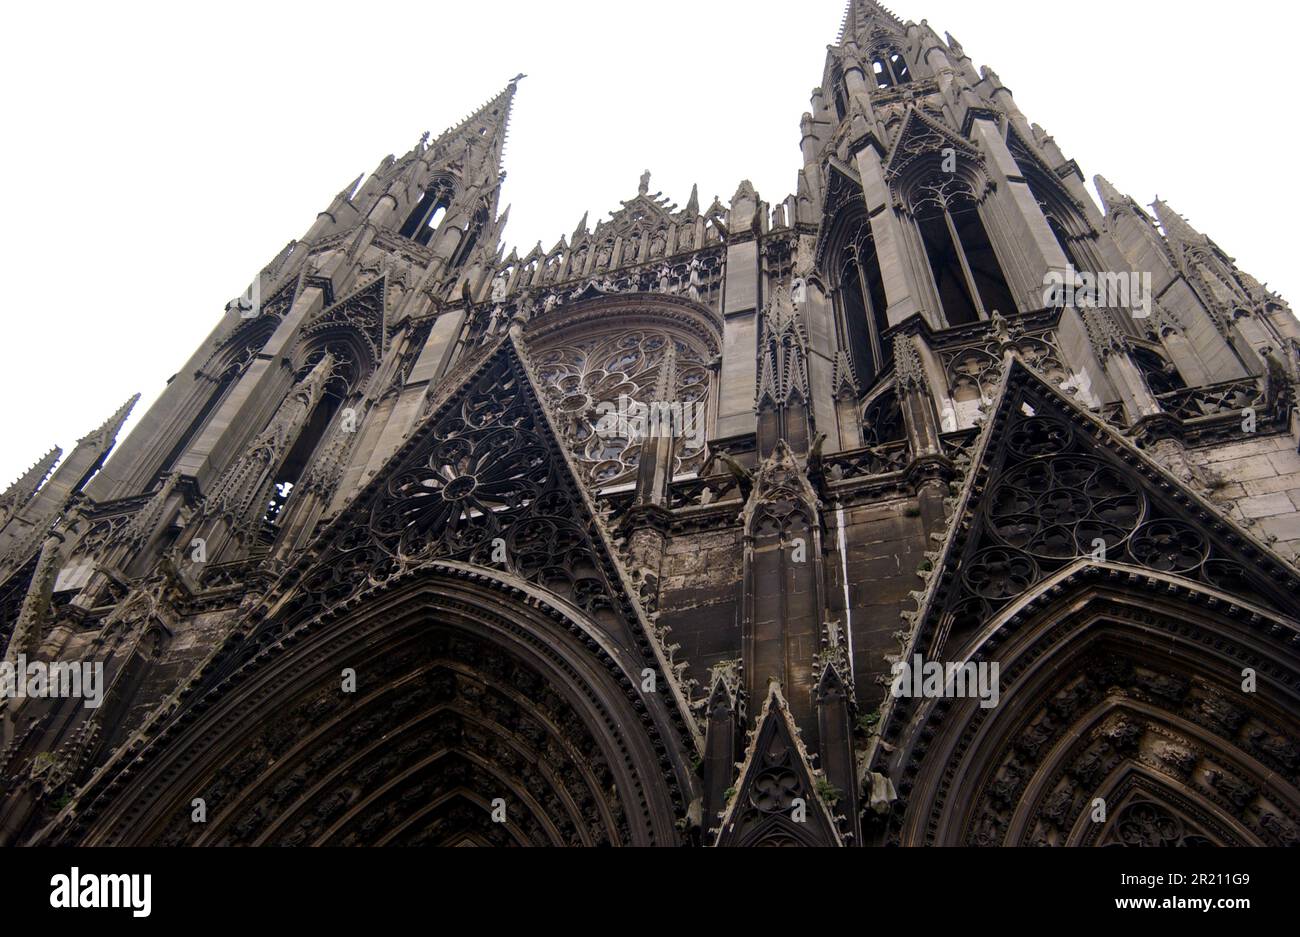 Photograph showing the exterior of the Church of Saint-Maclou, a Roman Catholic church in Rouen, France. Stock Photo